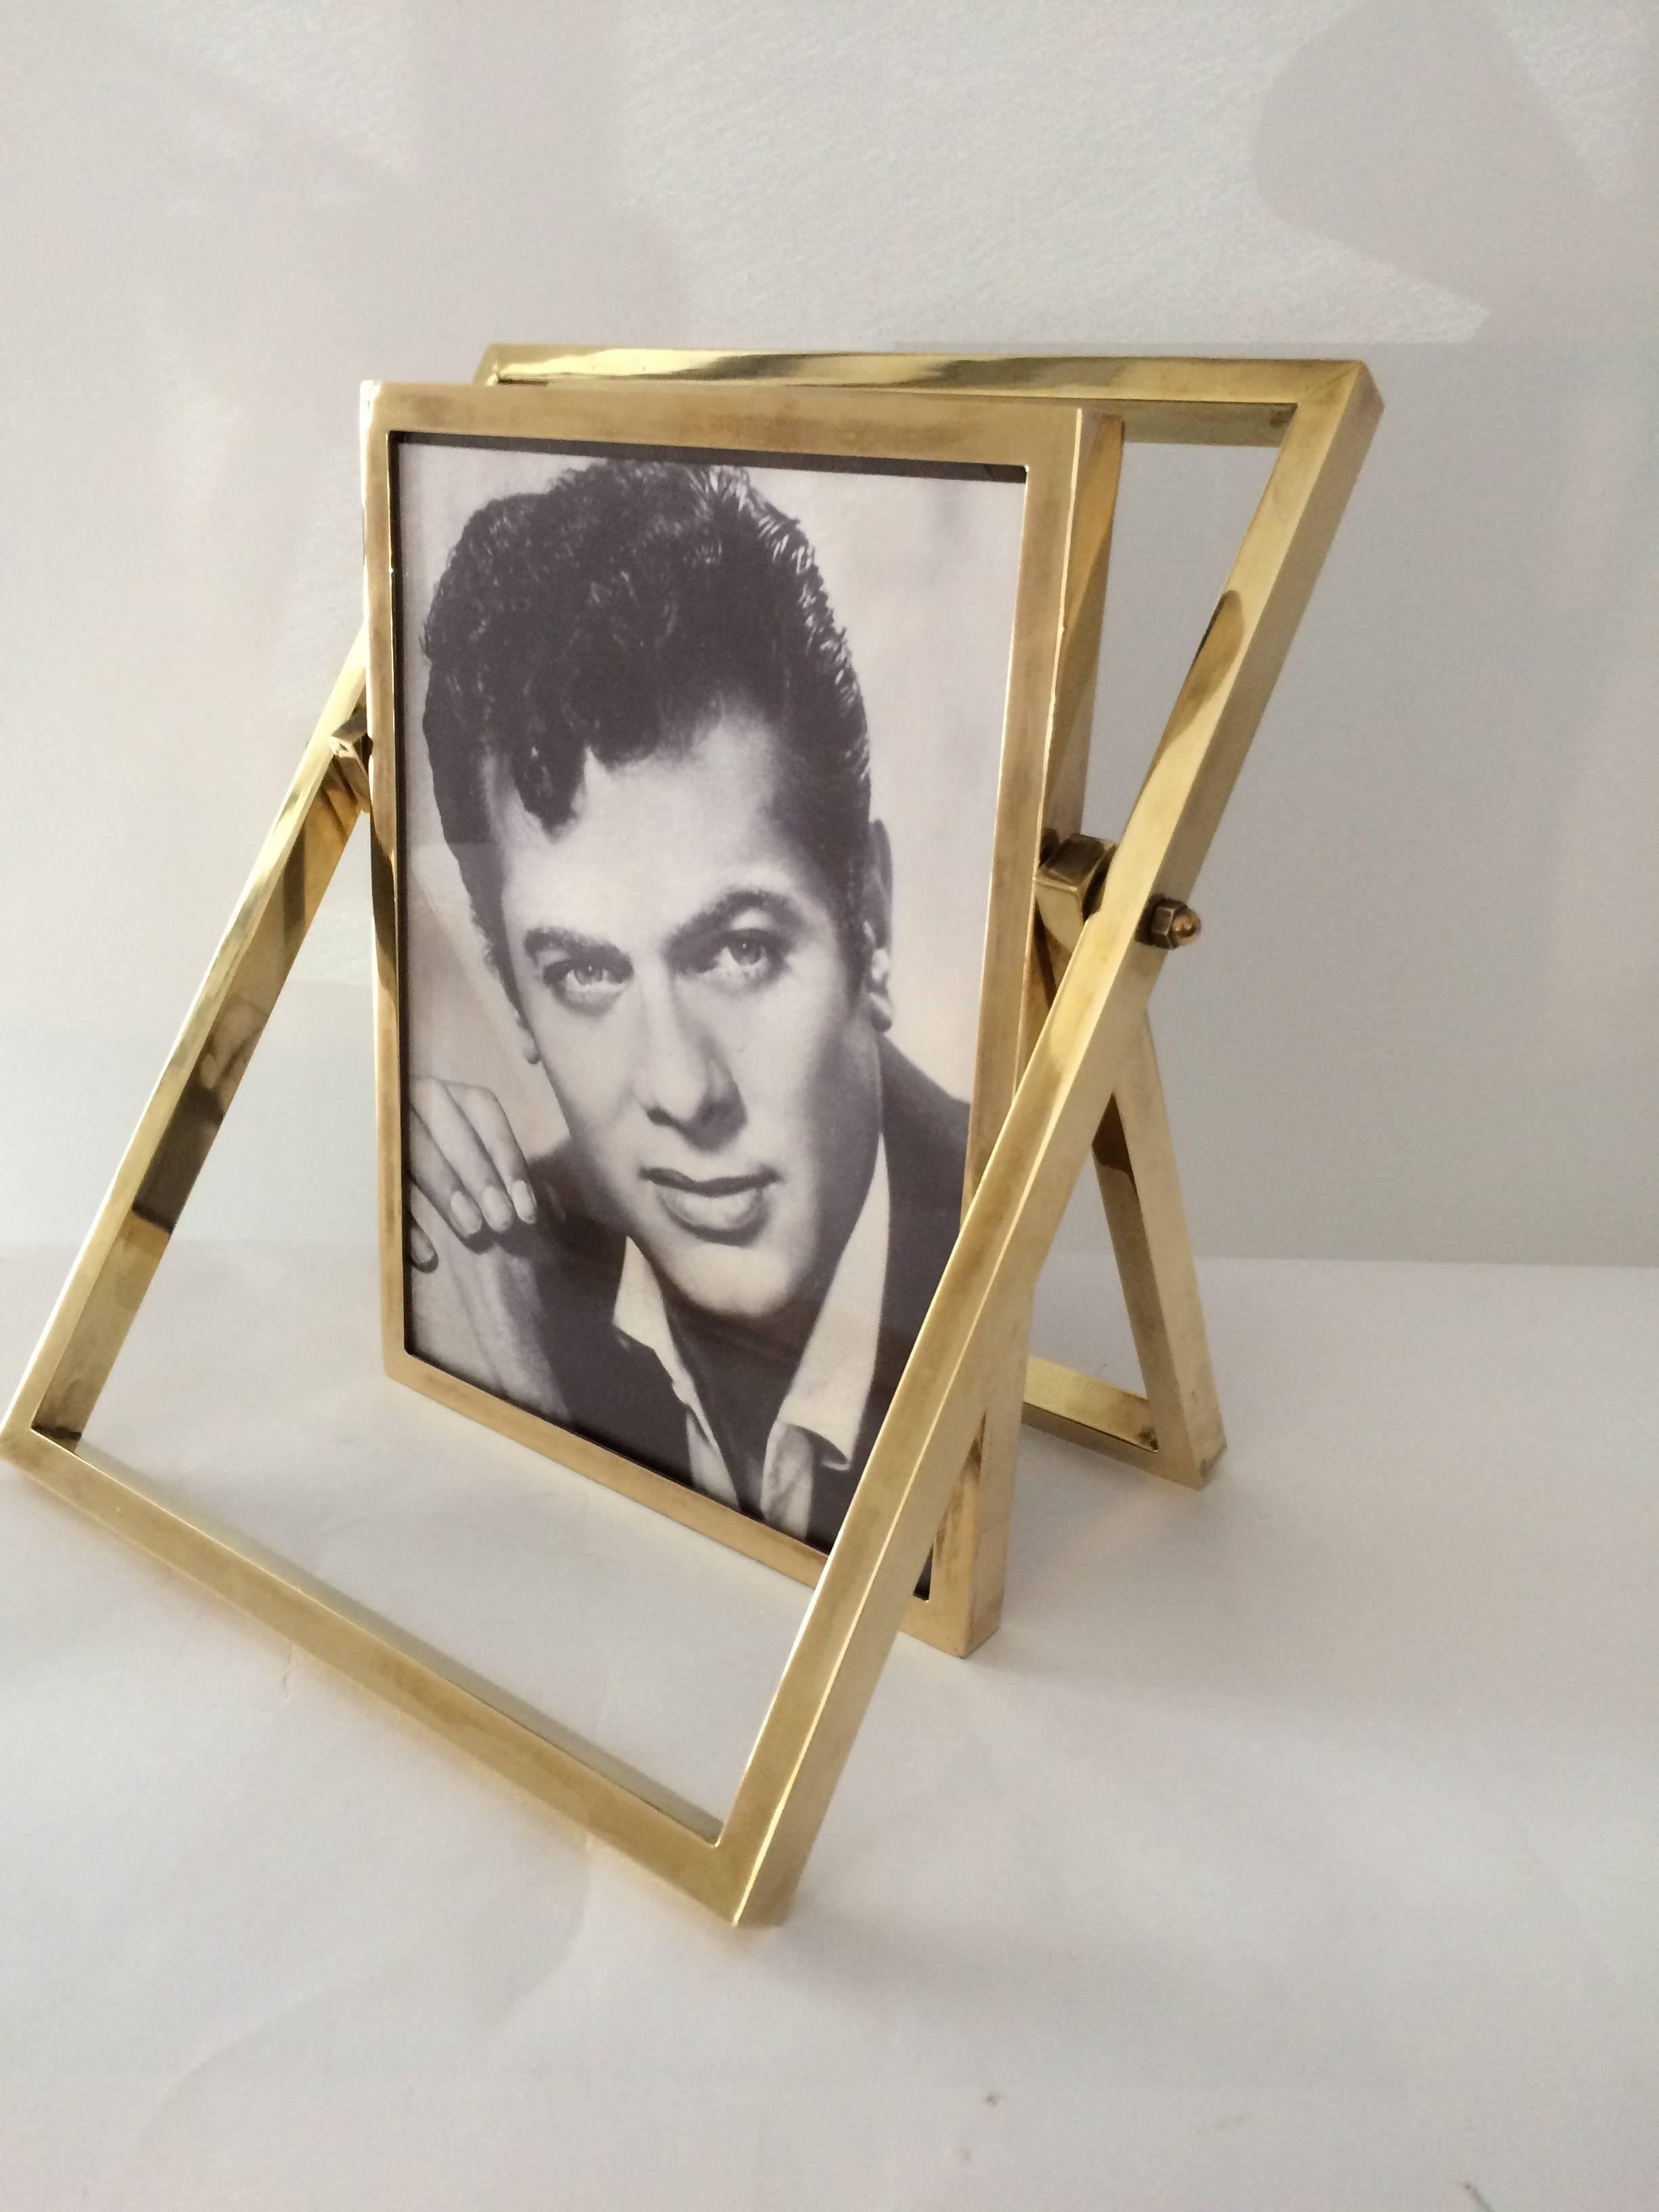 Most amazing and unusual French brass picture frame, 1970s. Can be adjusted to create different positions.